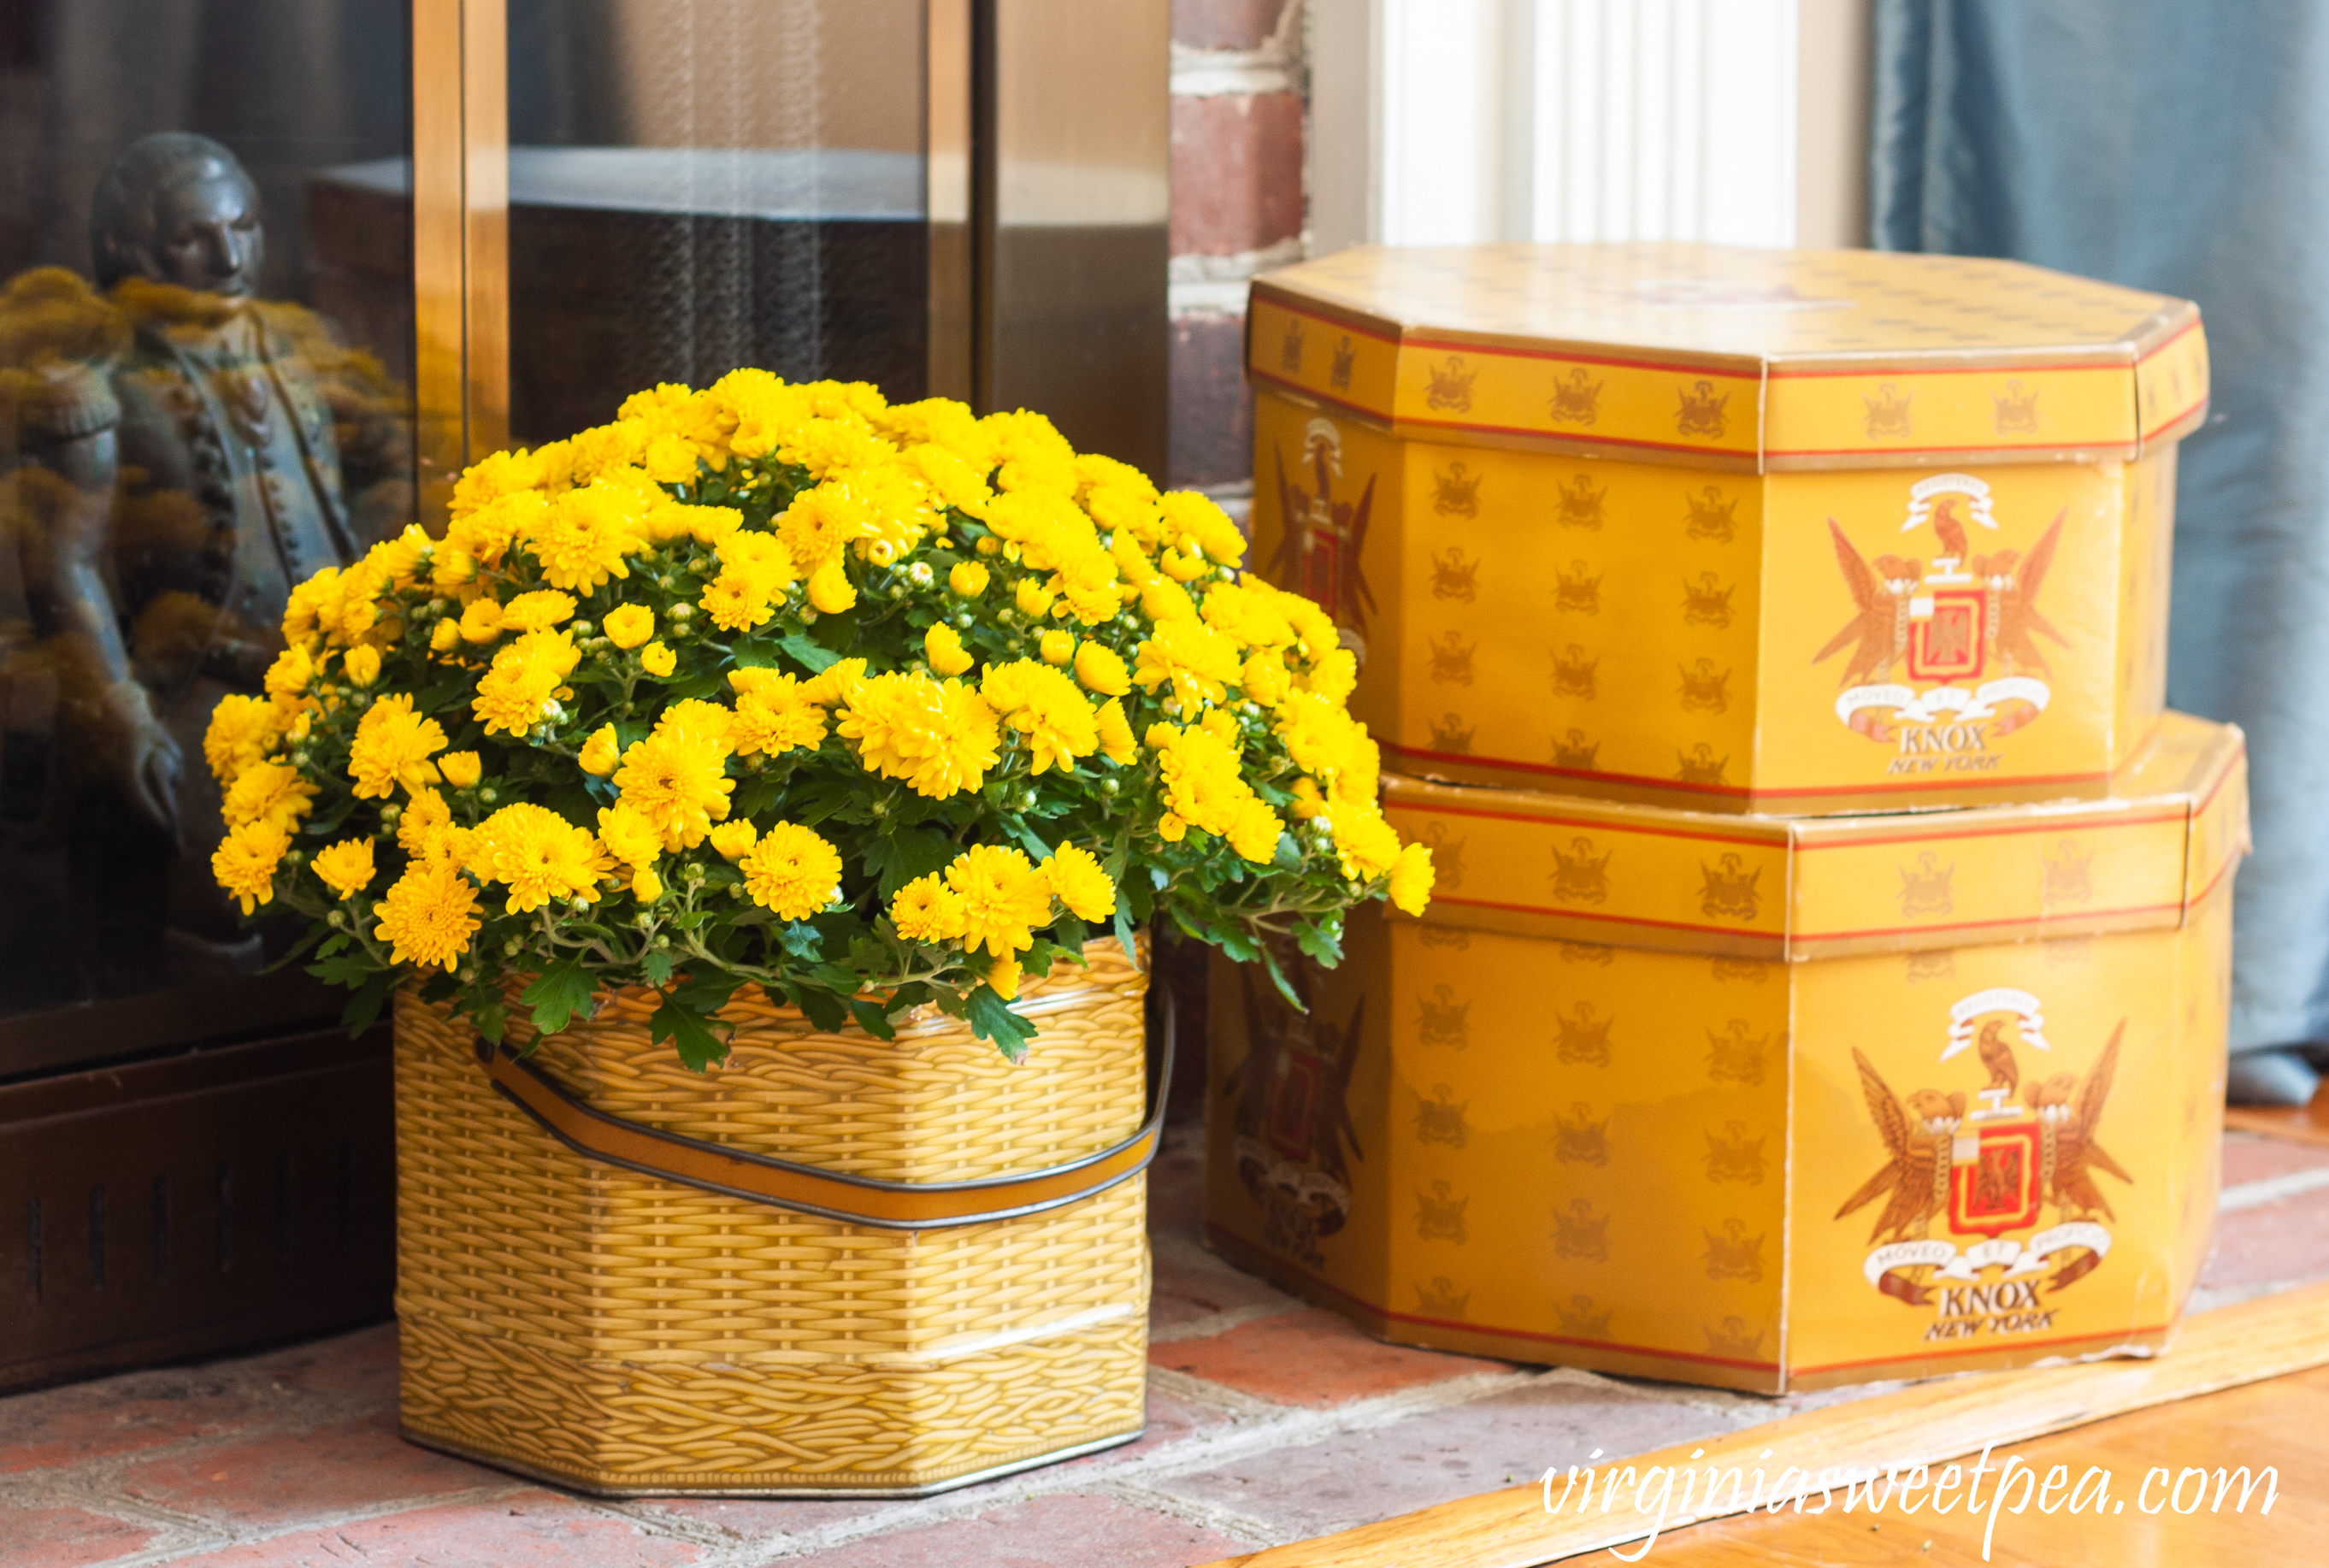 Knox New York hat boxes along with a mum in a vintage basket tin decorate a fireplace hearth for fall.